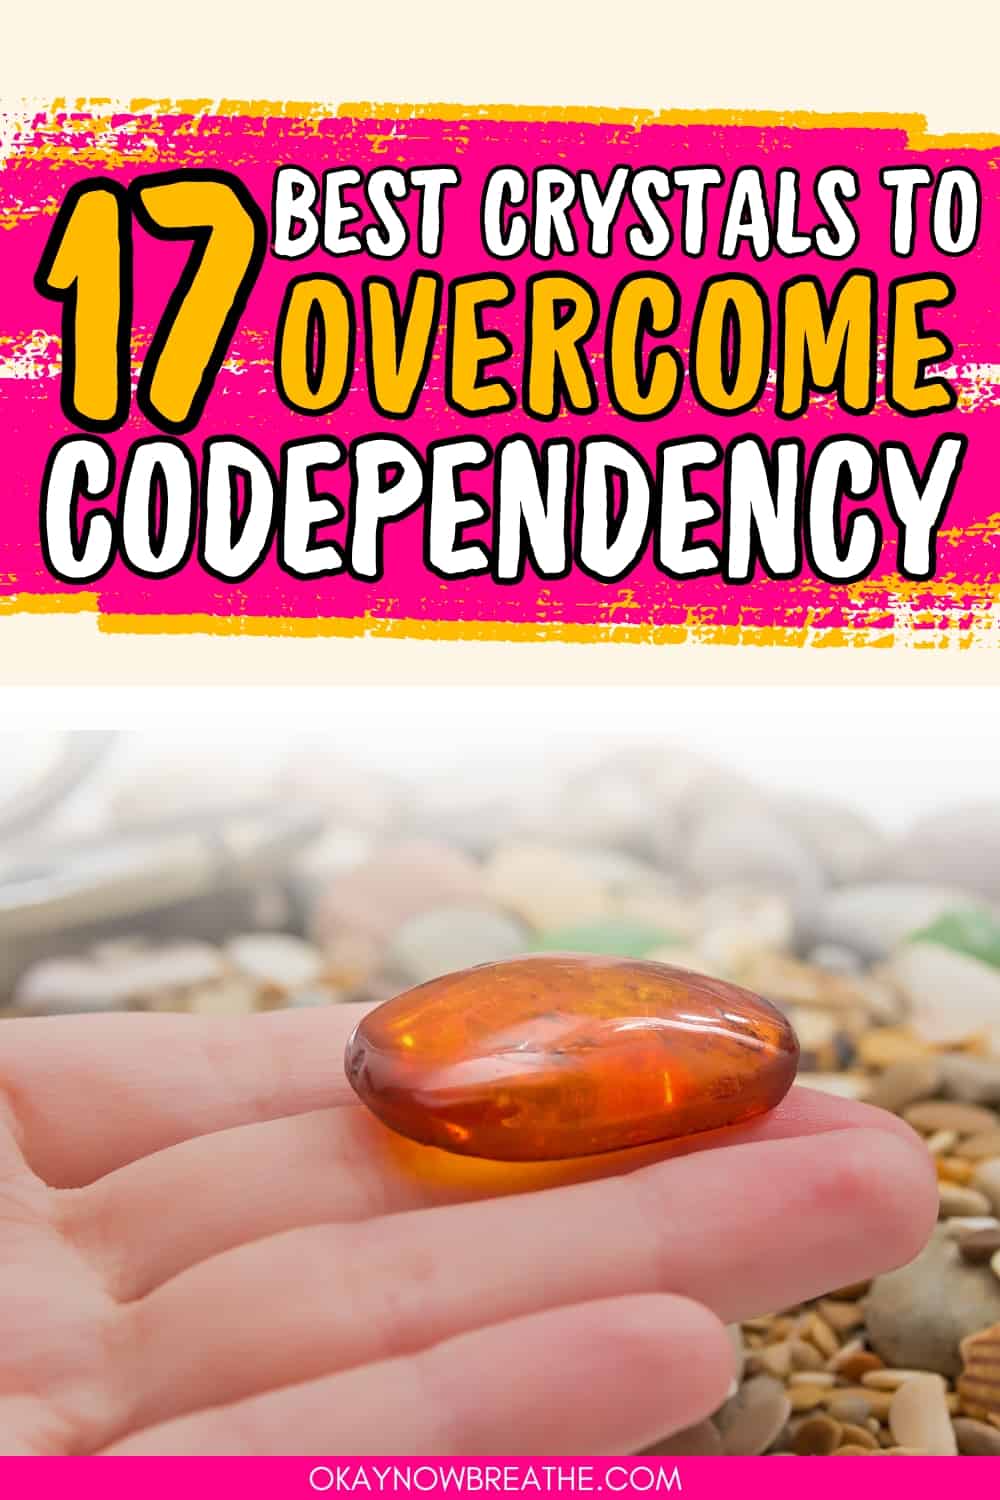 There is a palm folding a red crystal towards the fingers. Above, there is text that says, "17 best crystals to overcome codependency"